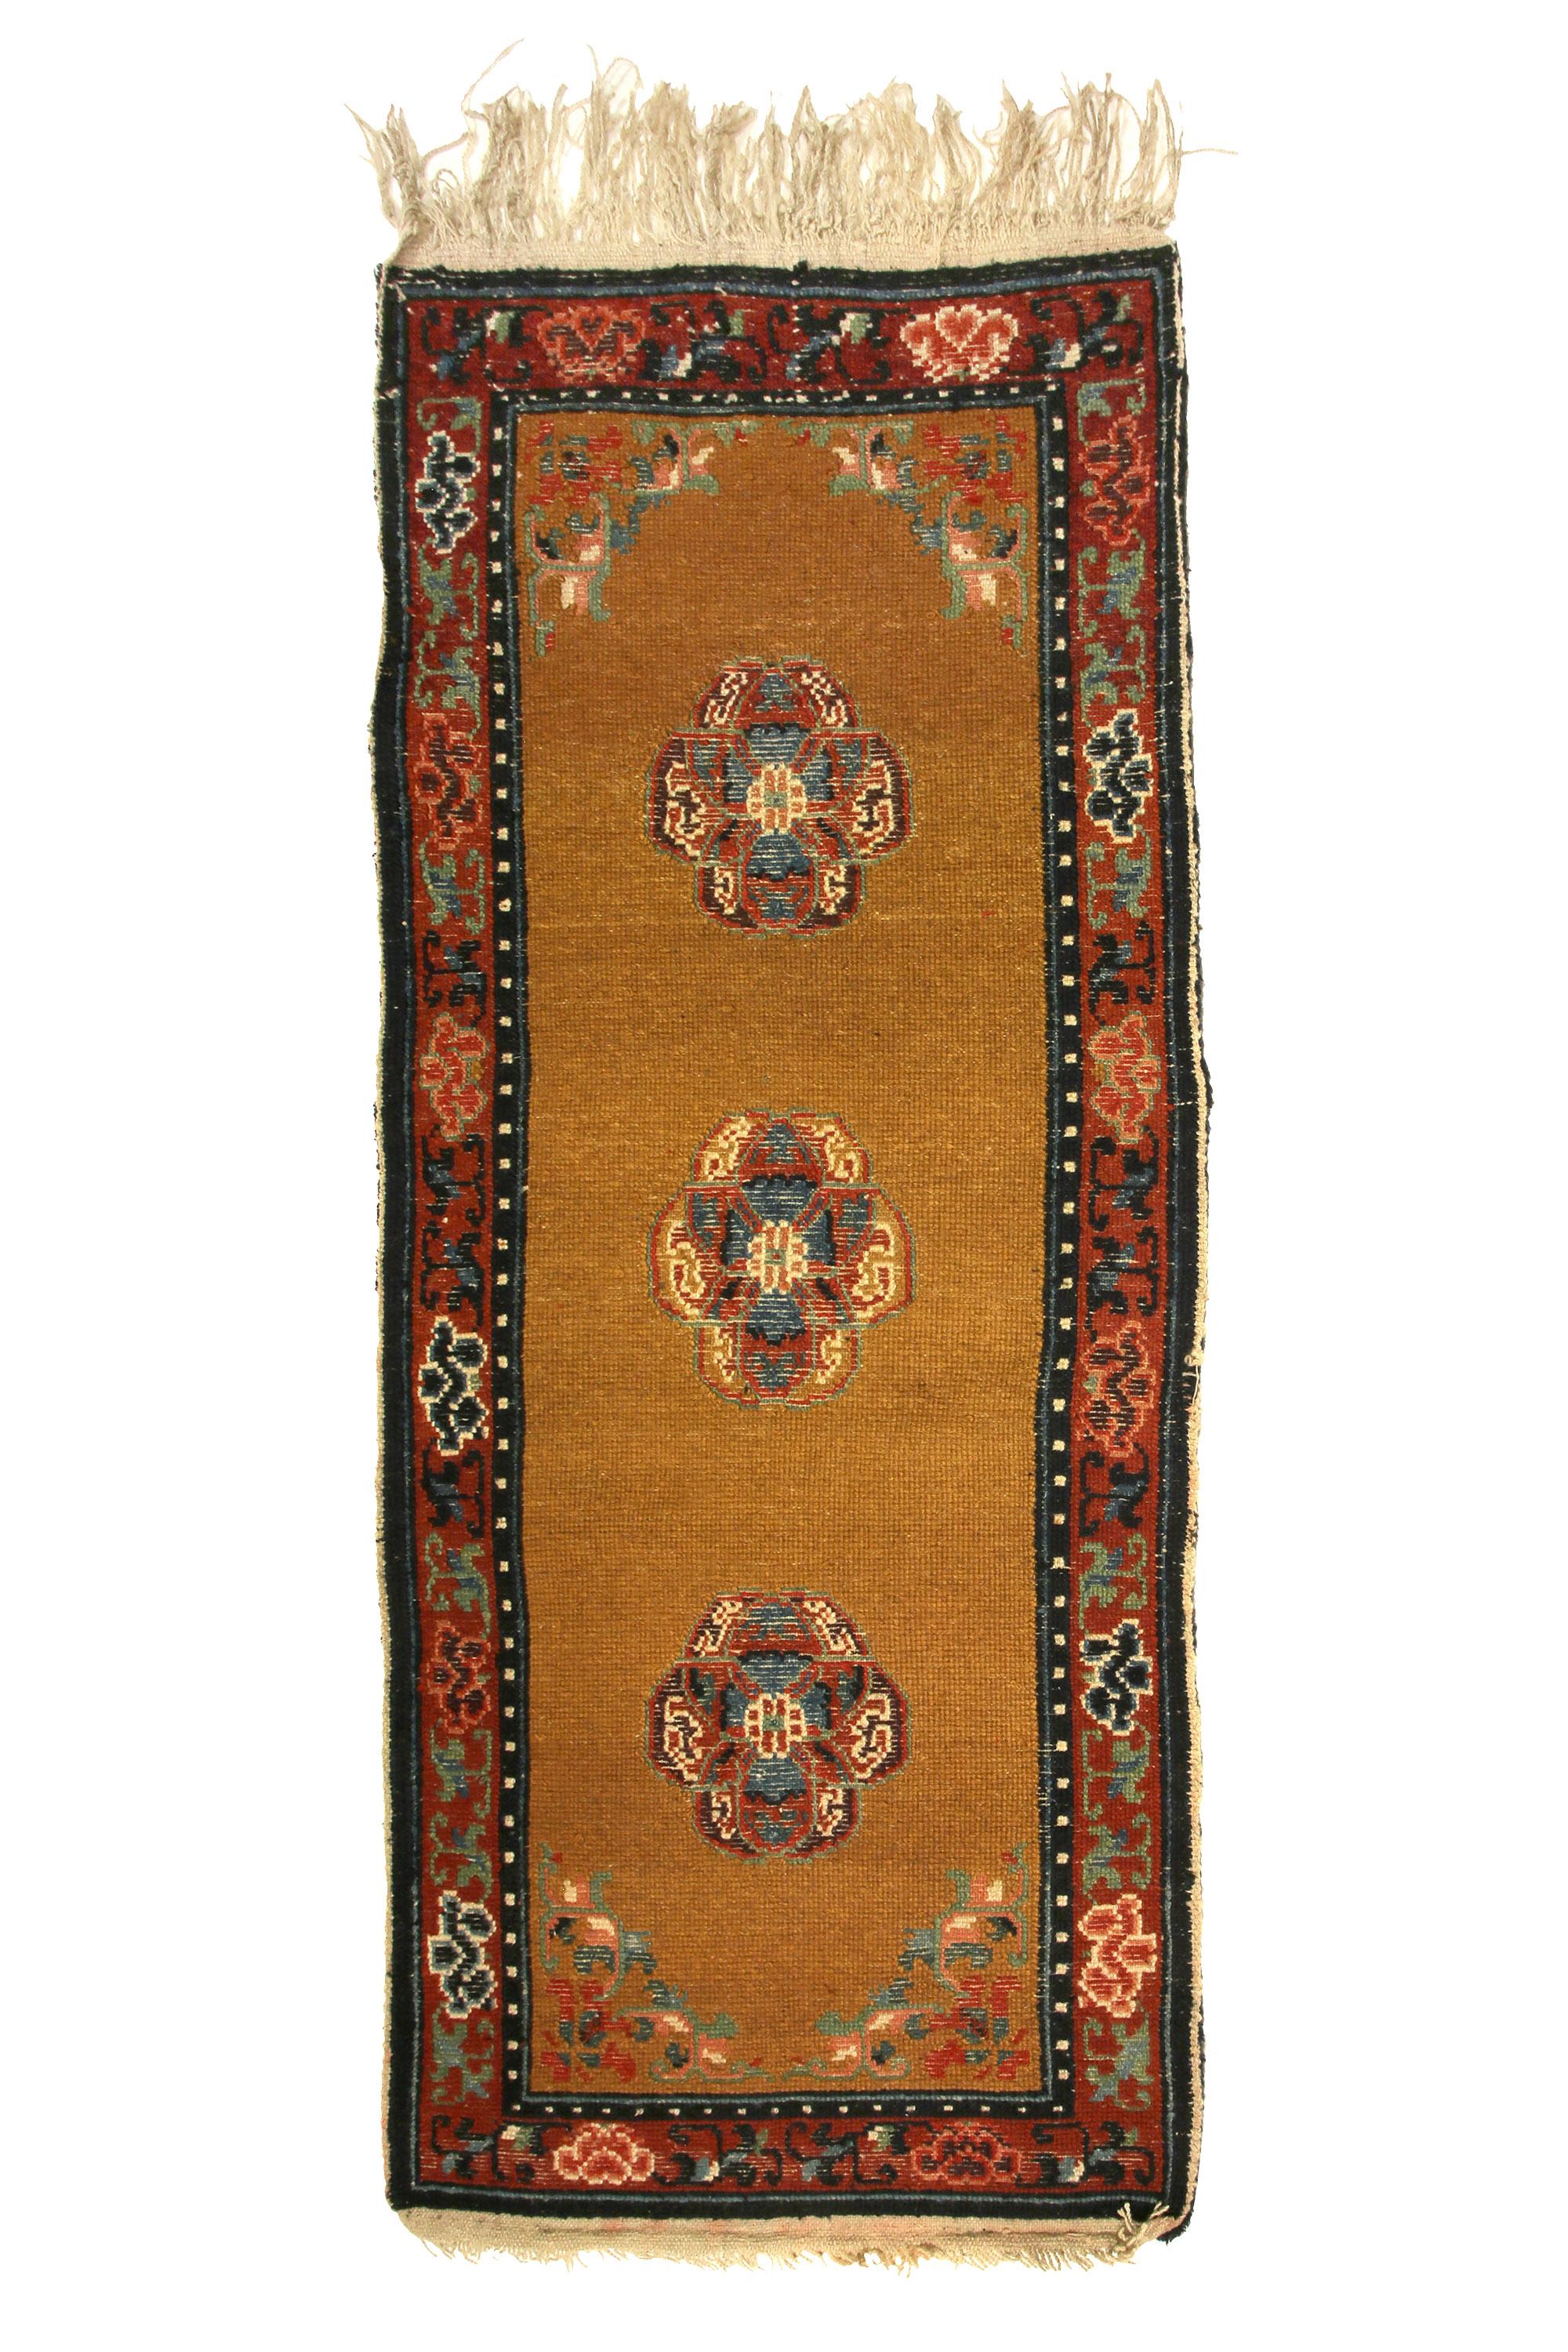 Tibetan sleeping carpet (Khaden)
With medallions composed from clusters of the inedible and sacred Lumpang fruit. The Lumpang symbolizes happiness and longevity thus carpet was originally woven with the purpose of inferring these qualities upon the